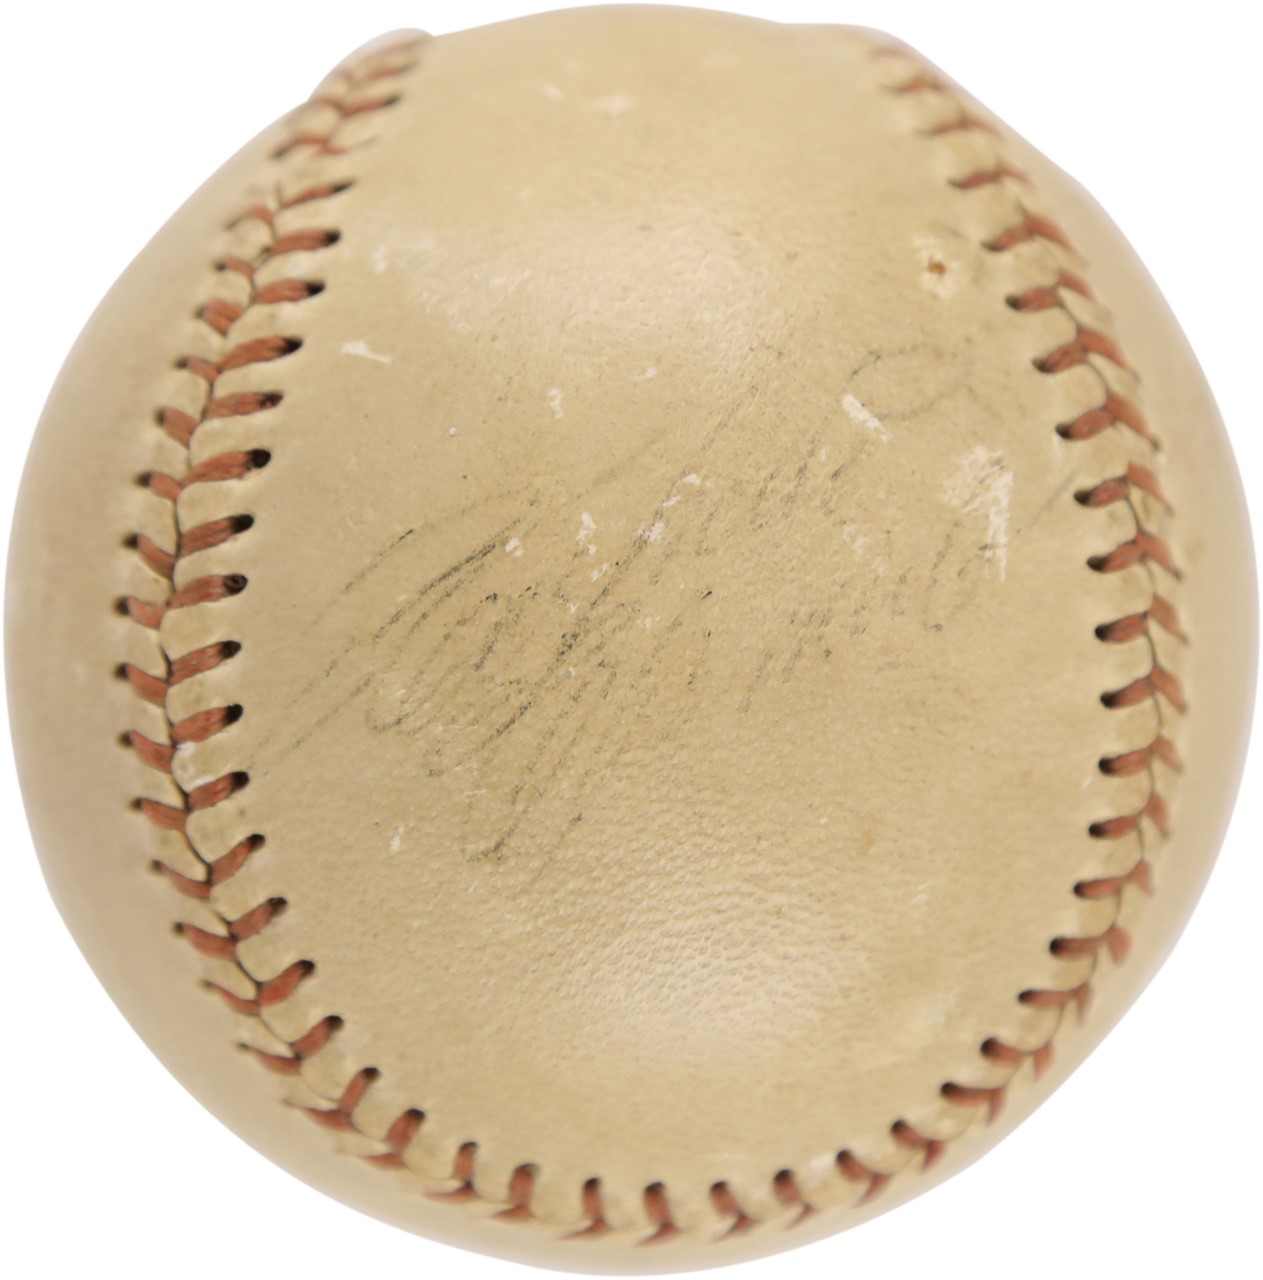 Clemente and Pittsburgh Pirates - Early 1970s Roberto Clemente Single Signed Baseball (JSA)